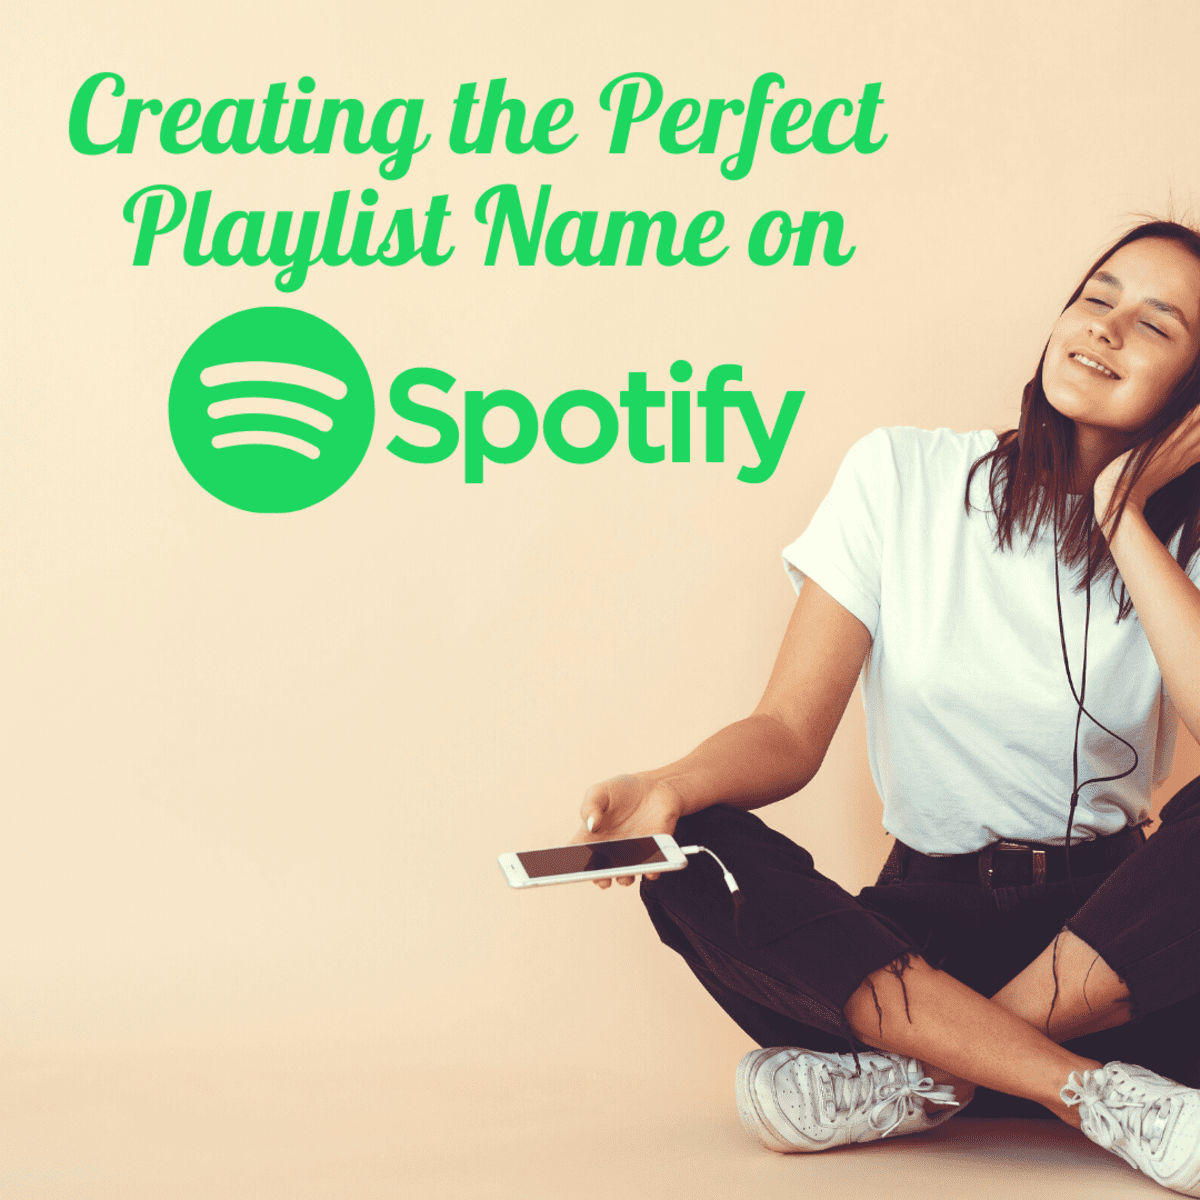 350+ Best Playlist Names for Spotify - TurboFuture